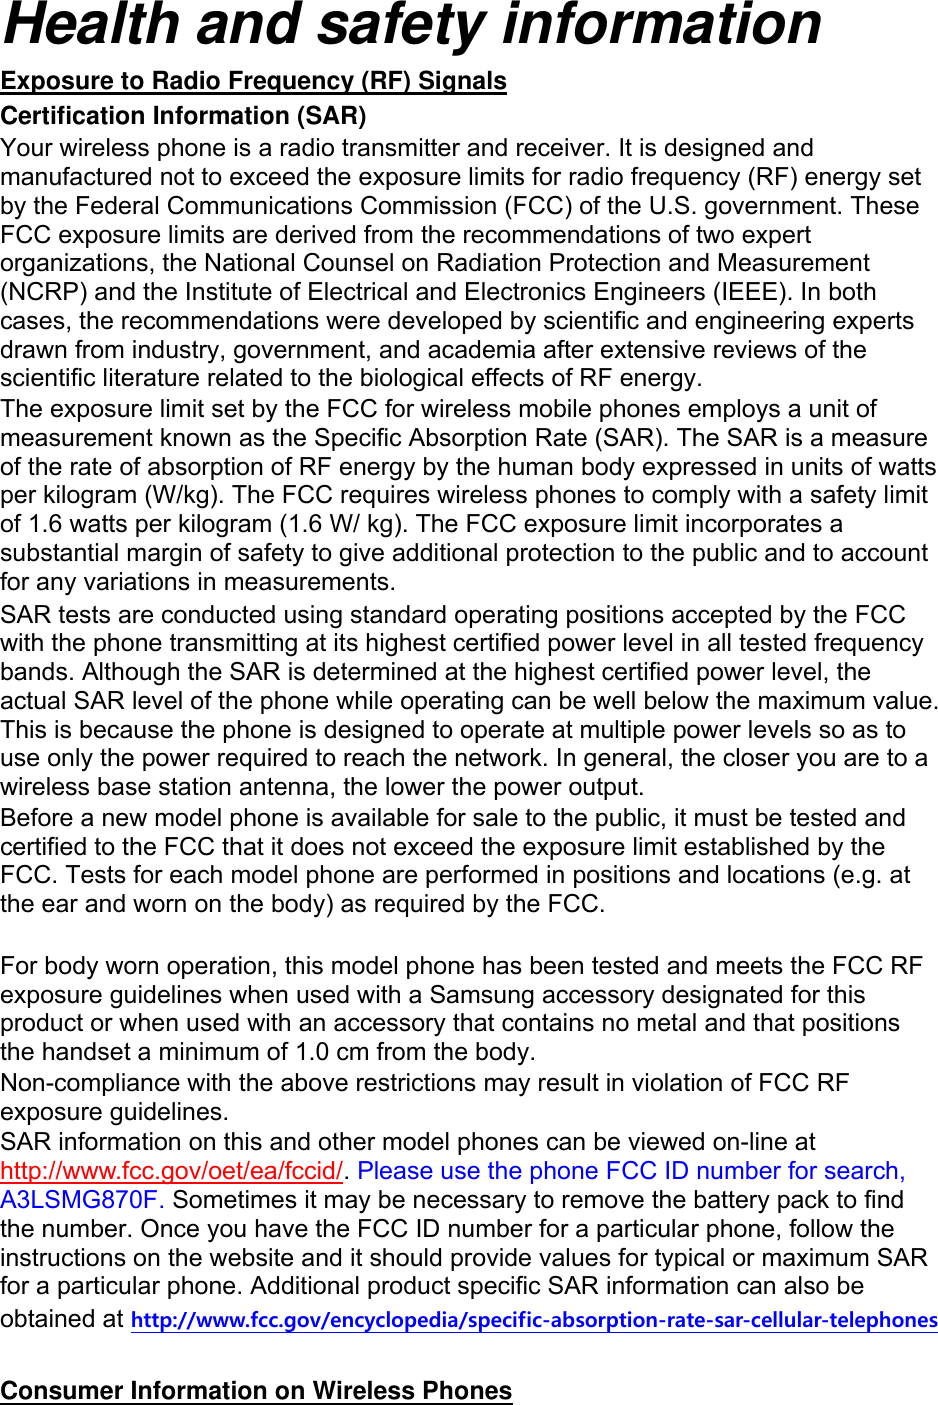 Health and safety information Exposure to Radio Frequency (RF) Signals Certification Information (SAR) Your wireless phone is a radio transmitter and receiver. It is designed and manufactured not to exceed the exposure limits for radio frequency (RF) energy set by the Federal Communications Commission (FCC) of the U.S. government. These FCC exposure limits are derived from the recommendations of two expert organizations, the National Counsel on Radiation Protection and Measurement (NCRP) and the Institute of Electrical and Electronics Engineers (IEEE). In both cases, the recommendations were developed by scientific and engineering experts drawn from industry, government, and academia after extensive reviews of the scientific literature related to the biological effects of RF energy. The exposure limit set by the FCC for wireless mobile phones employs a unit of measurement known as the Specific Absorption Rate (SAR). The SAR is a measure of the rate of absorption of RF energy by the human body expressed in units of watts per kilogram (W/kg). The FCC requires wireless phones to comply with a safety limit of 1.6 watts per kilogram (1.6 W/ kg). The FCC exposure limit incorporates a substantial margin of safety to give additional protection to the public and to account for any variations in measurements. SAR tests are conducted using standard operating positions accepted by the FCC with the phone transmitting at its highest certified power level in all tested frequency bands. Although the SAR is determined at the highest certified power level, the actual SAR level of the phone while operating can be well below the maximum value. This is because the phone is designed to operate at multiple power levels so as to use only the power required to reach the network. In general, the closer you are to a wireless base station antenna, the lower the power output. Before a new model phone is available for sale to the public, it must be tested and certified to the FCC that it does not exceed the exposure limit established by the FCC. Tests for each model phone are performed in positions and locations (e.g. at the ear and worn on the body) as required by the FCC.      For body worn operation, this model phone has been tested and meets the FCC RF exposure guidelines when used with a Samsung accessory designated for this product or when used with an accessory that contains no metal and that positions the handset a minimum of 1.0 cm from the body.   Non-compliance with the above restrictions may result in violation of FCC RF exposure guidelines. SAR information on this and other model phones can be viewed on-line at http://www.fcc.gov/oet/ea/fccid/. Please use the phone FCC ID number for search, A3LSMG870F. Sometimes it may be necessary to remove the battery pack to find the number. Once you have the FCC ID number for a particular phone, follow the instructions on the website and it should provide values for typical or maximum SAR for a particular phone. Additional product specific SAR information can also be obtained at http://www.fcc.gov/encyclopedia/specific-absorption-rate-sar-cellular-telephones  Consumer Information on Wireless Phones 